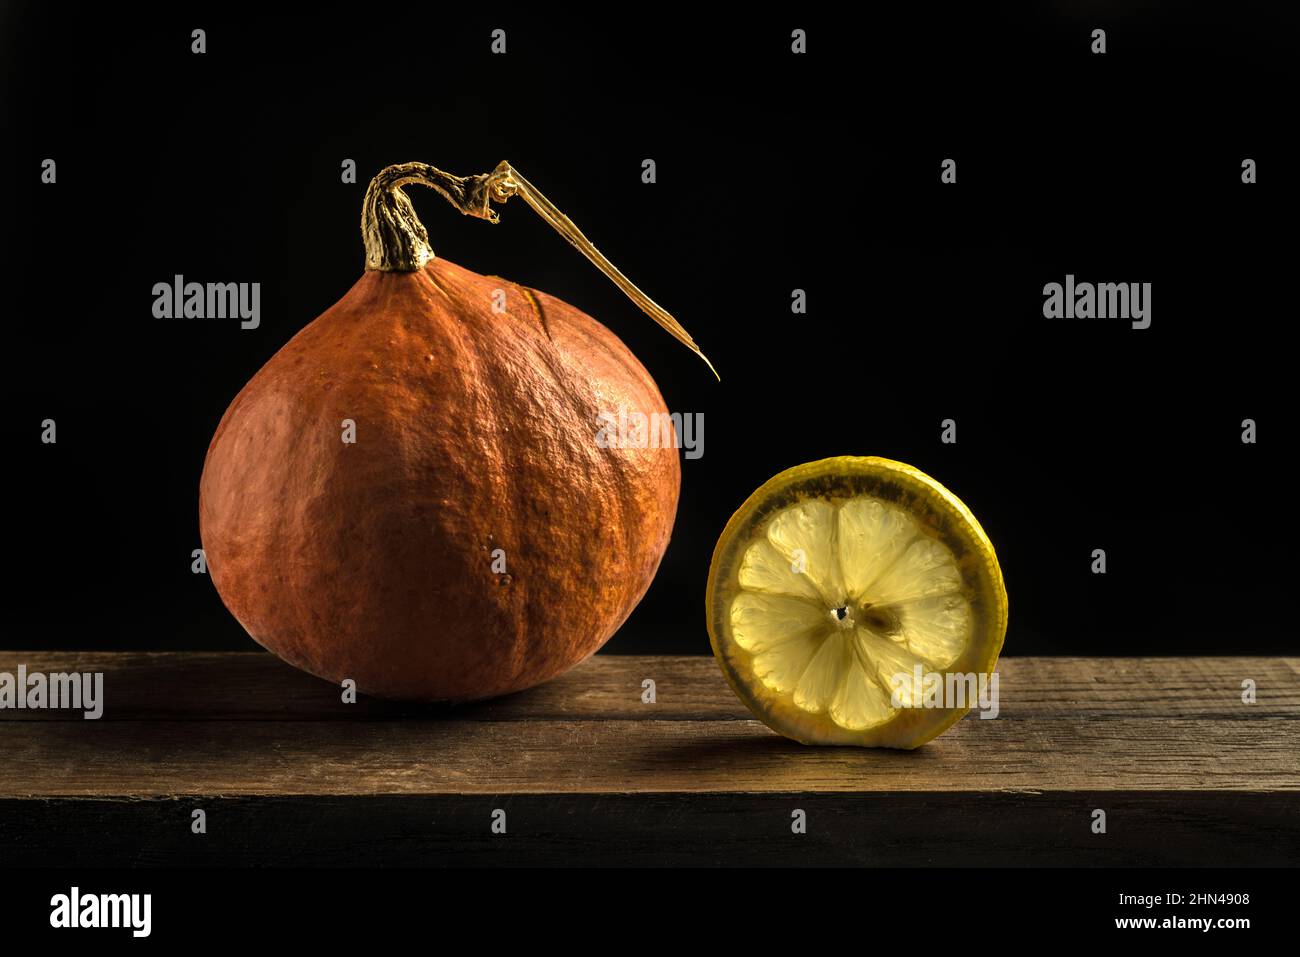 still life showing a pumpkin and a slice of lemon on a black background Stock Photo